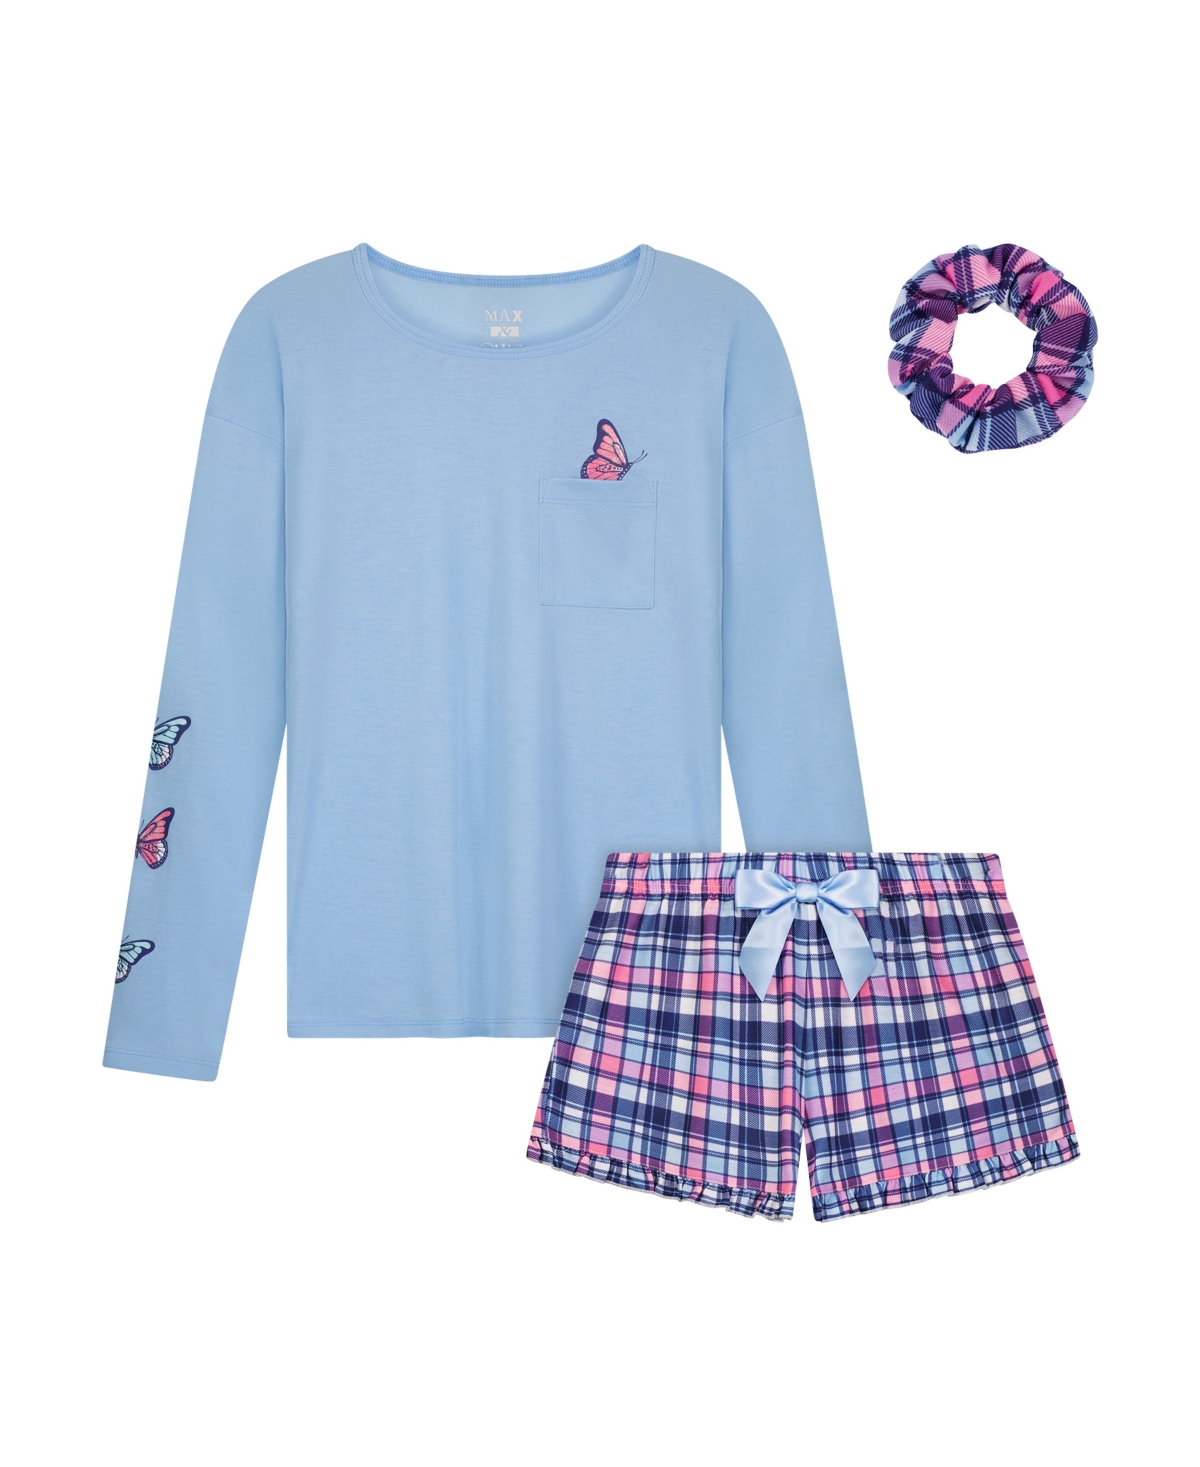 Max & Olivia Kids' Big Girls Top With Screen Print, Shorts With Bow At Waist, Matching Scrunchie, 3 Piece Set In Blue